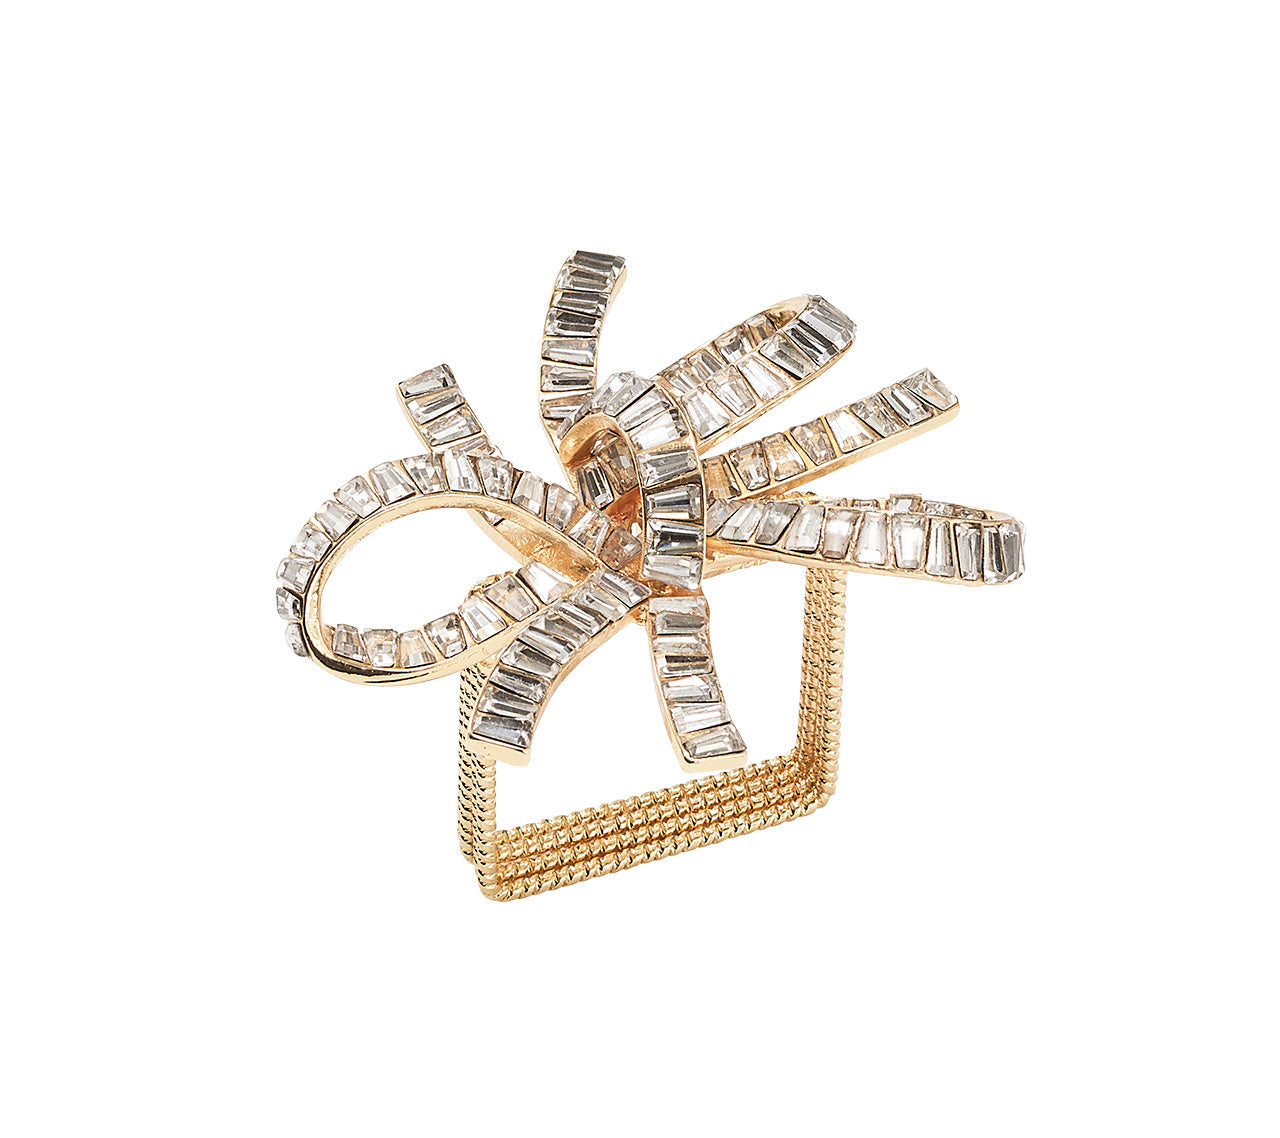 Jeweled Bow Napkin Ring in Gold & Crystal